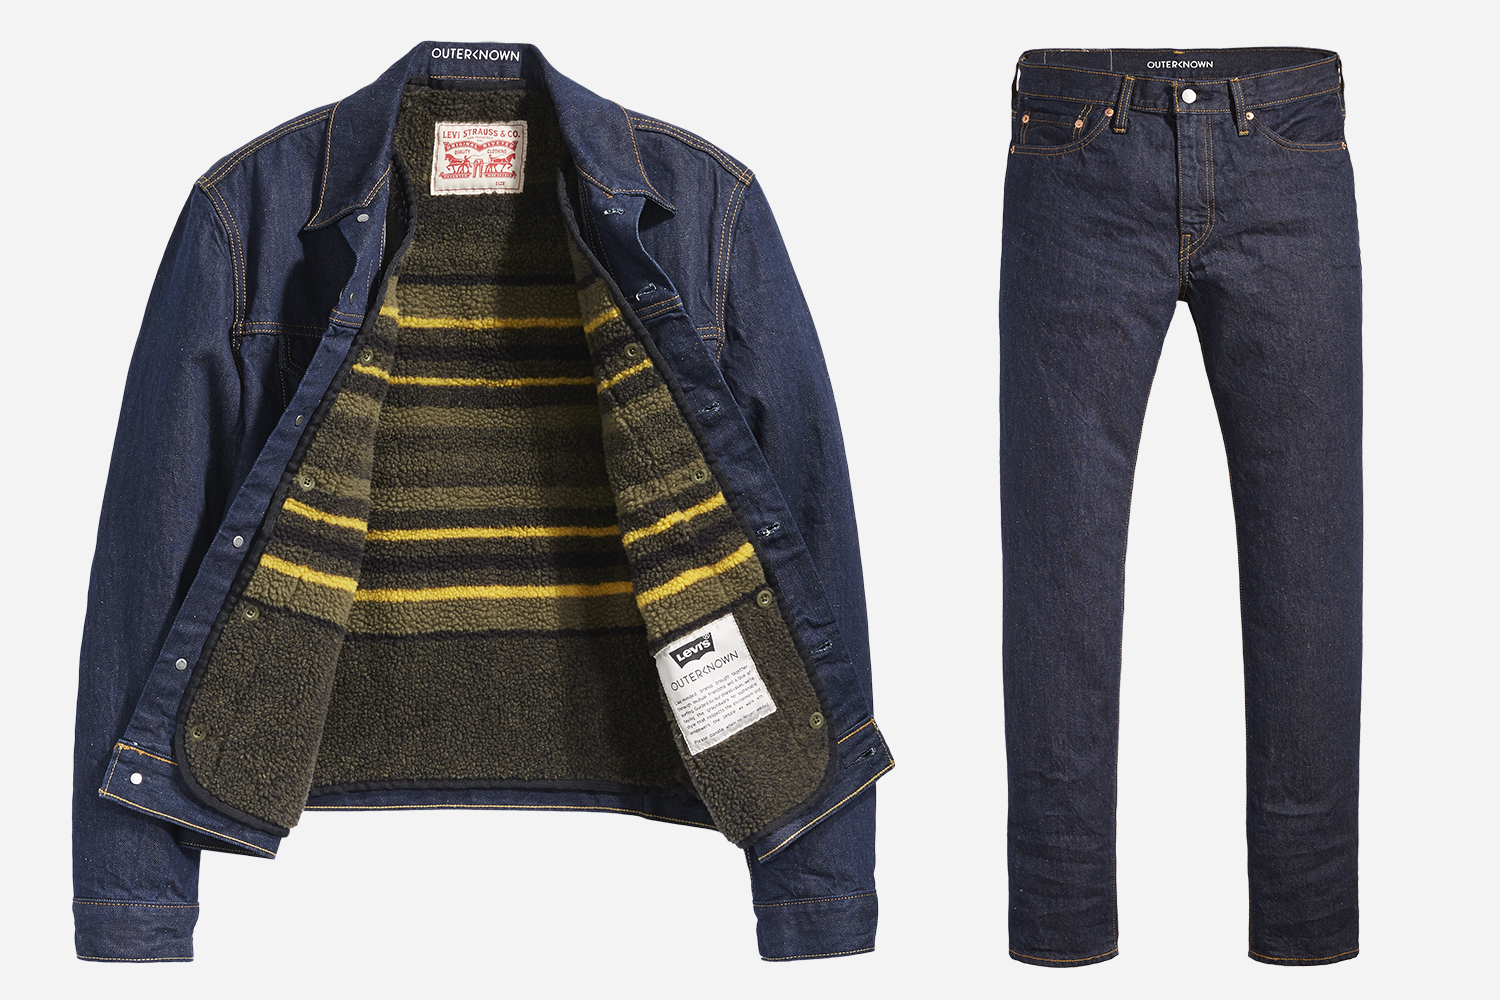 How Levi's and Outerknown Created the 